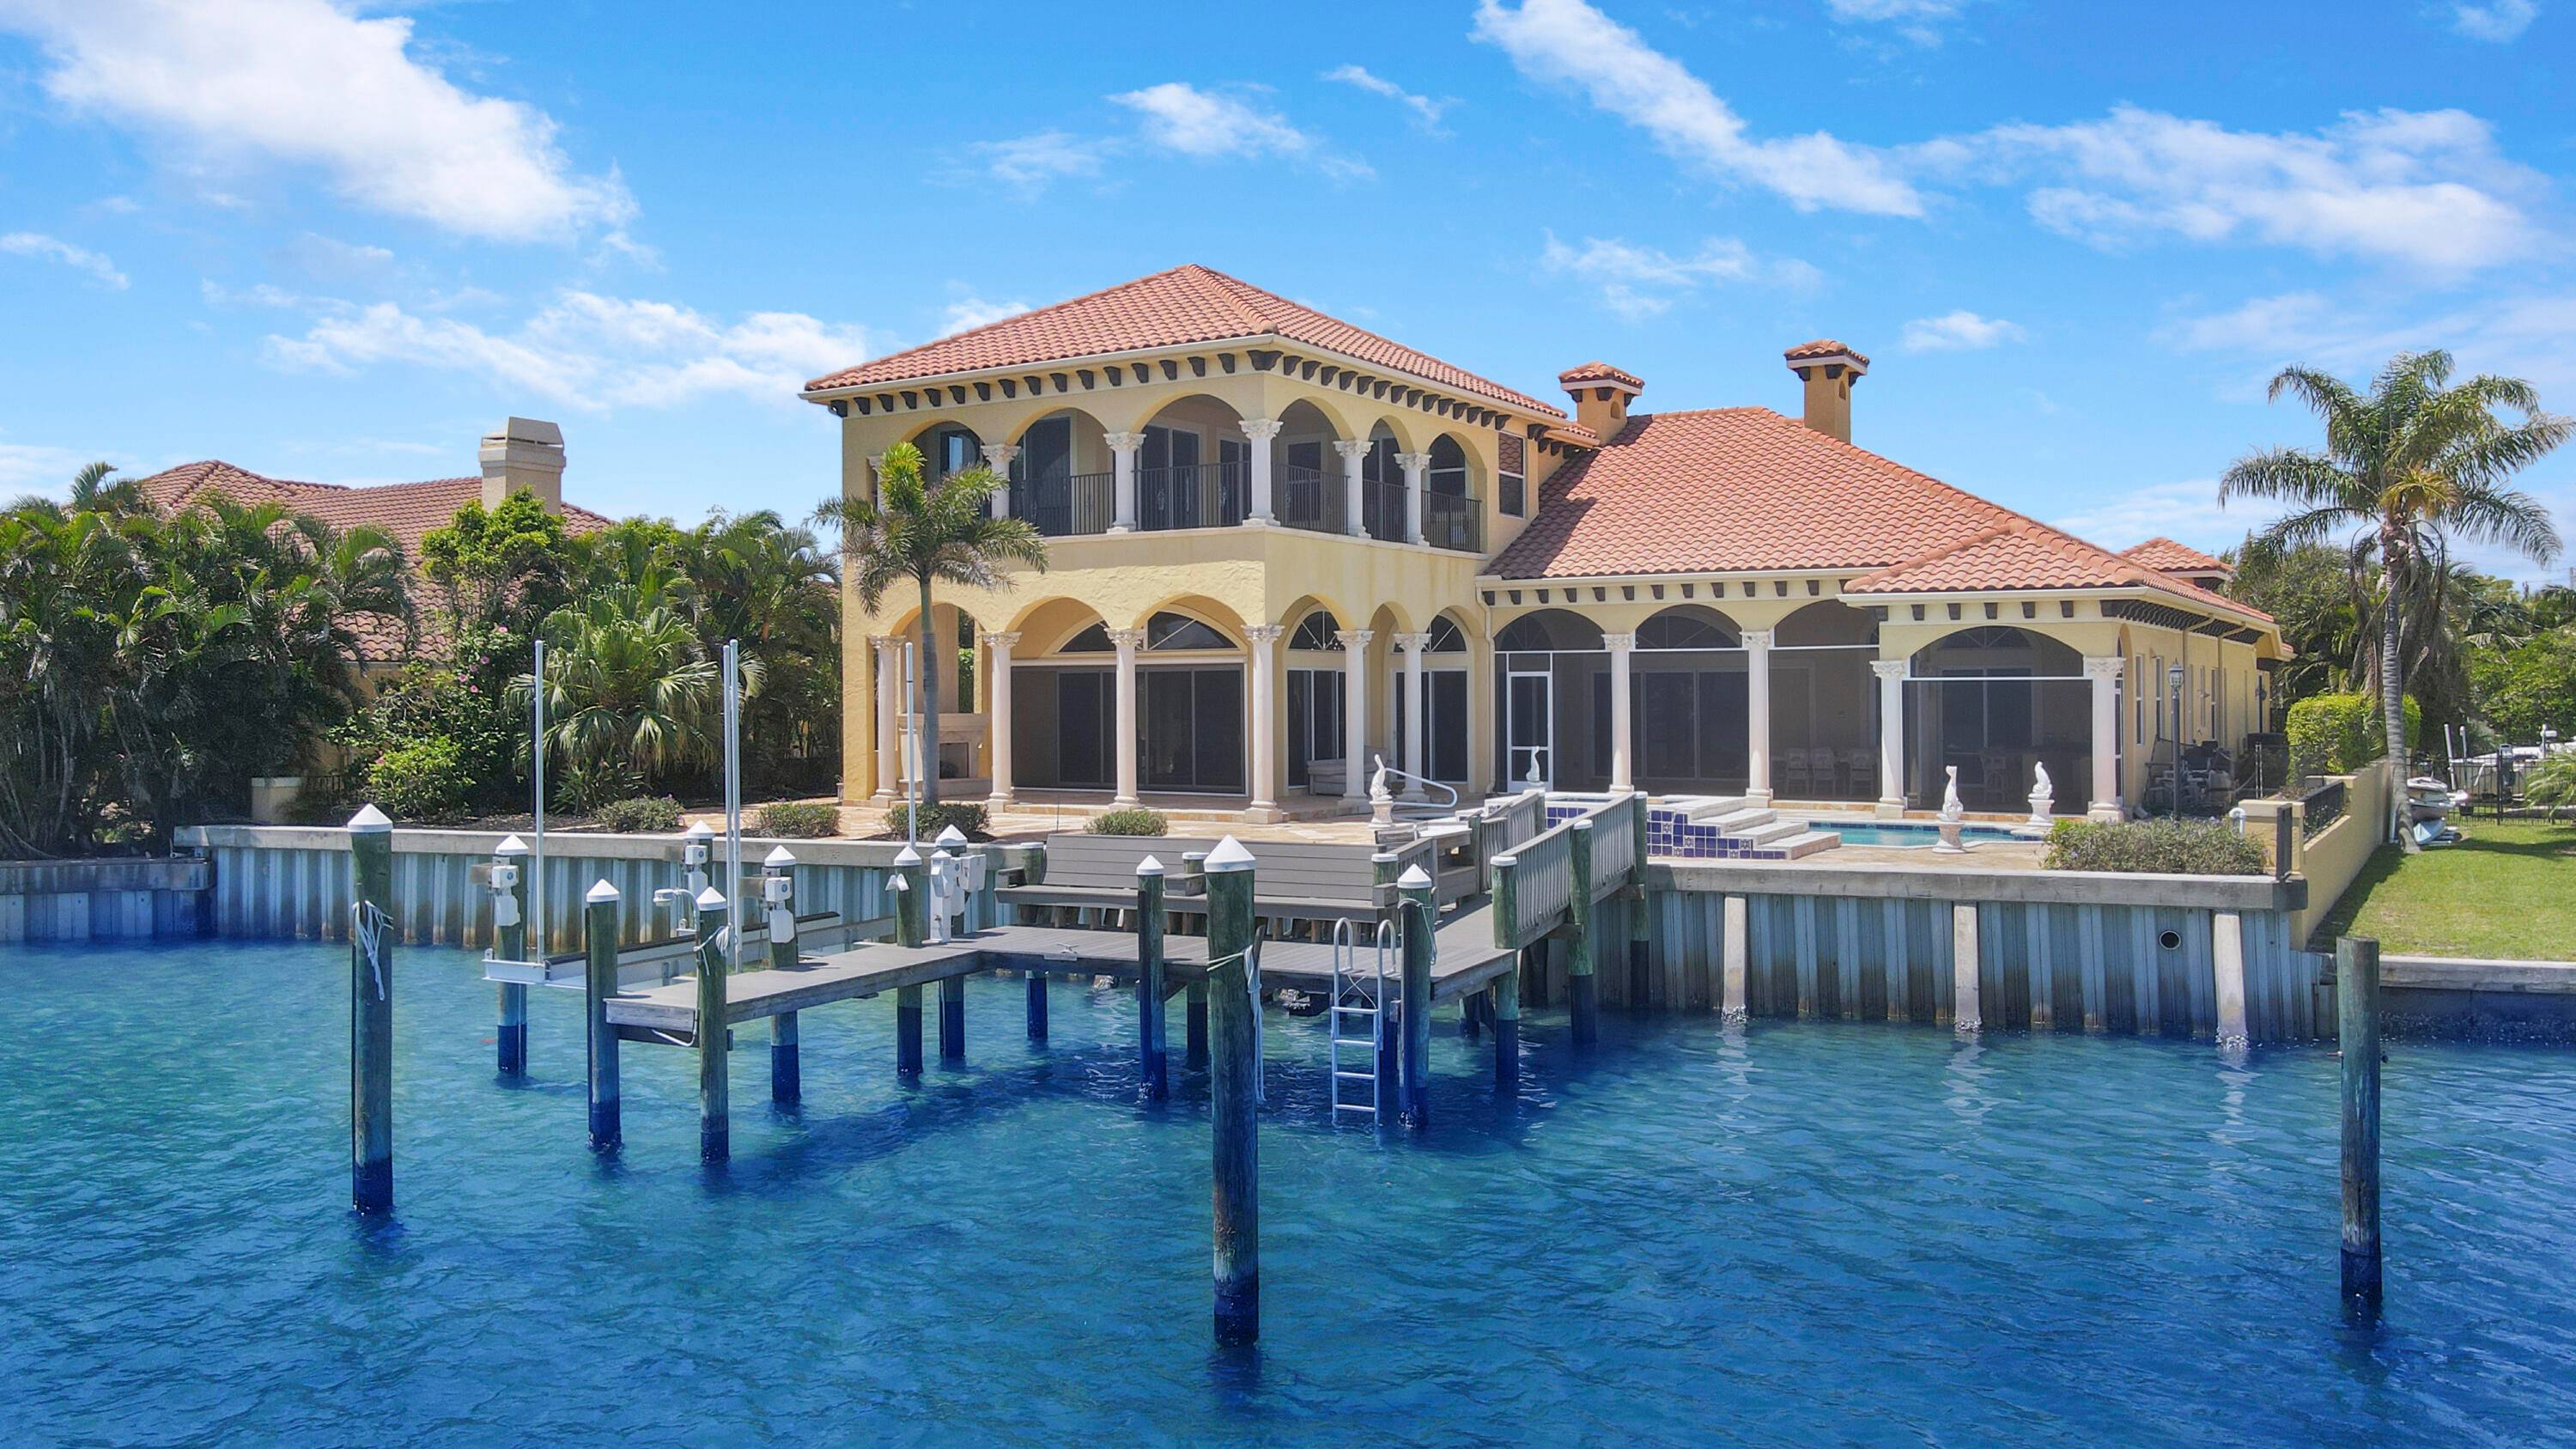 Well built estate home on the highly sought after Bahama blue water of the Intracoastal Waterway !